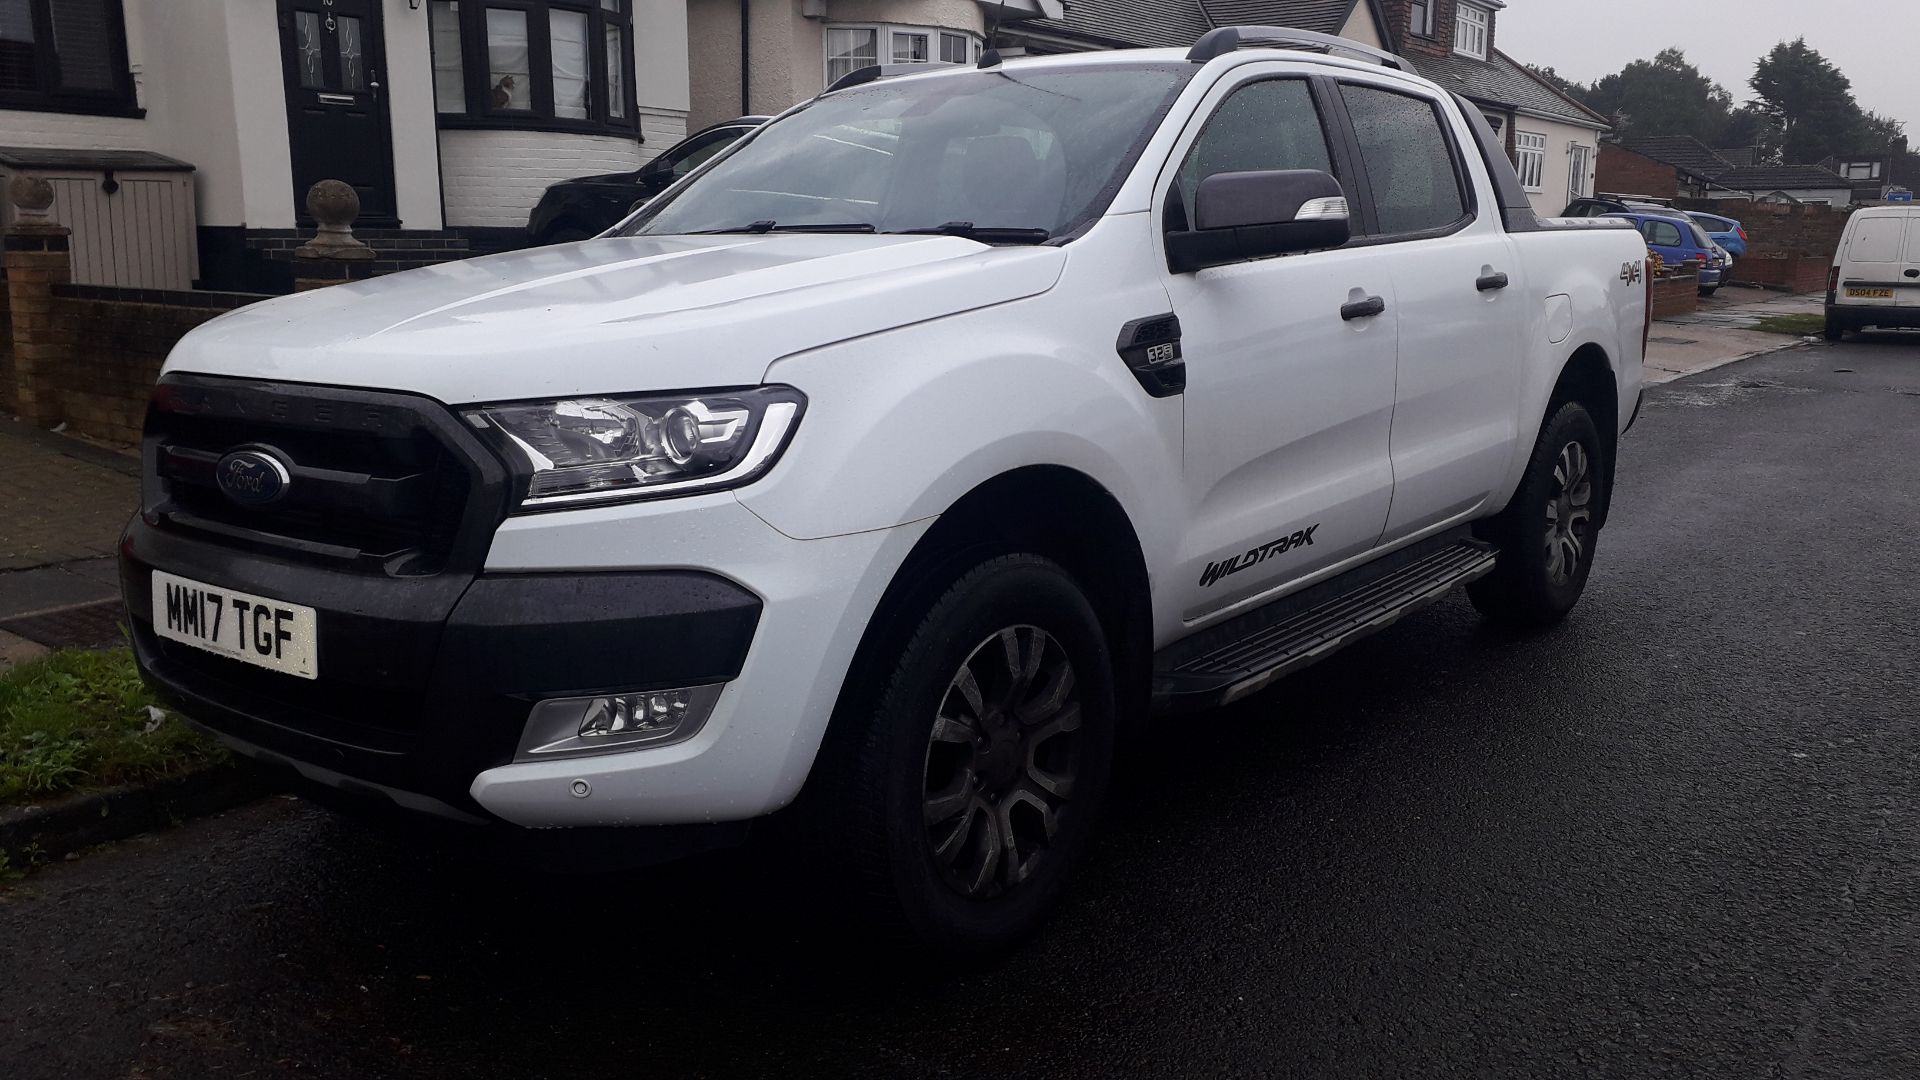 Ford Ranger Wildtrak 3.2 TDCi 200 Auto Double Cab Pick Up (2017) - Image 3 of 26